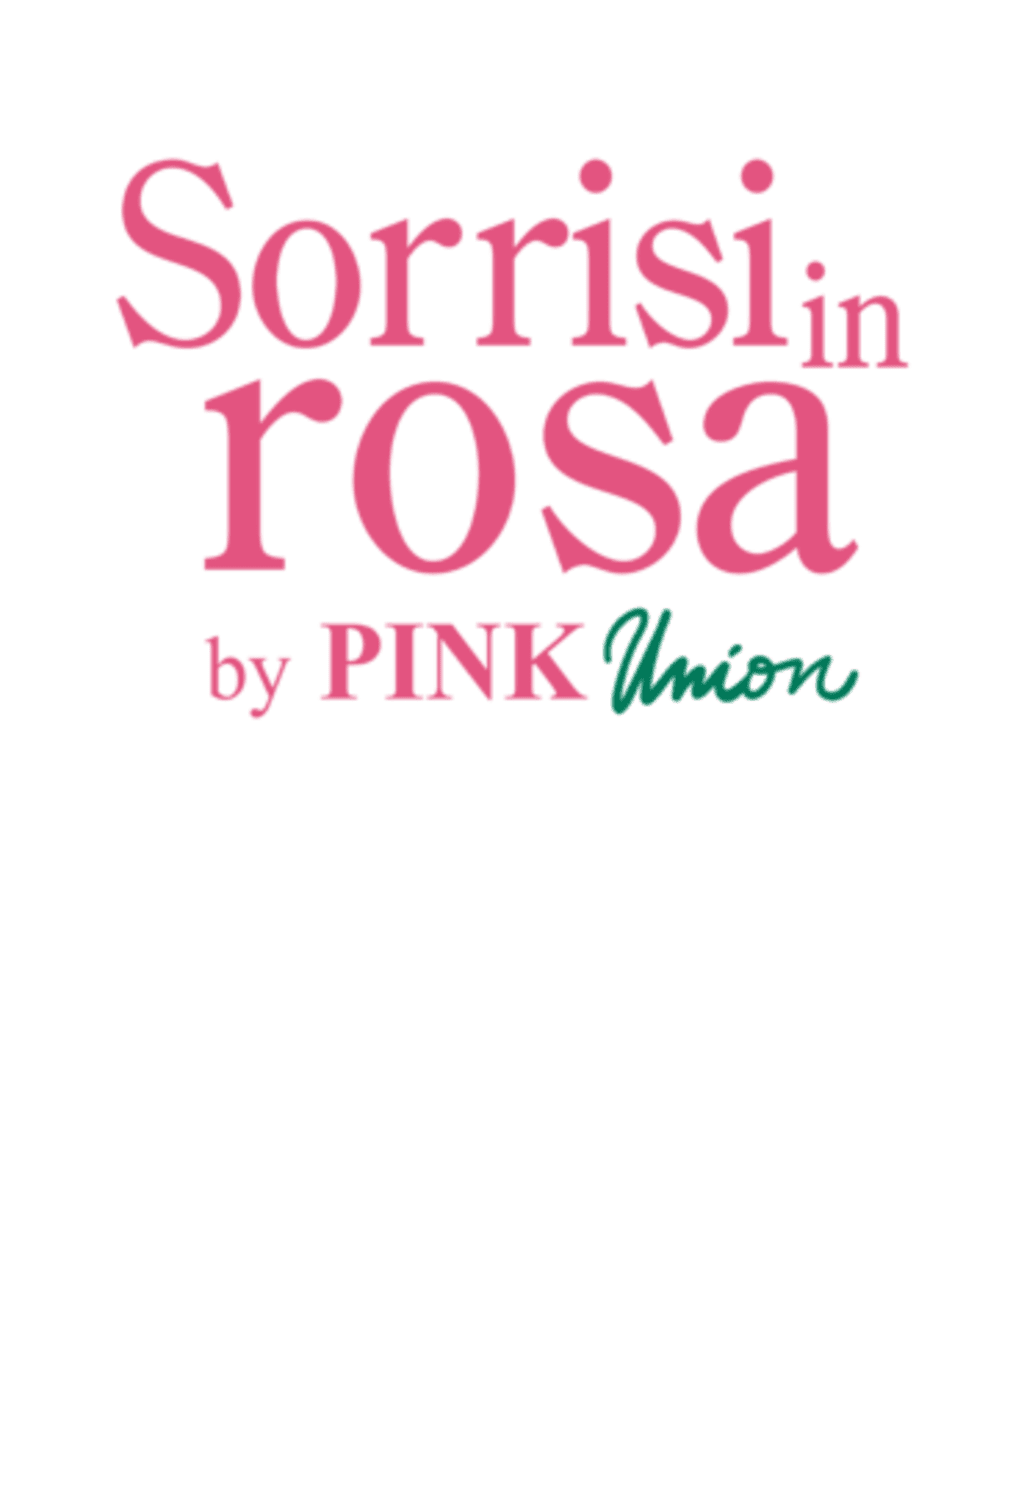 Sorrisi in rosa by Pink Union